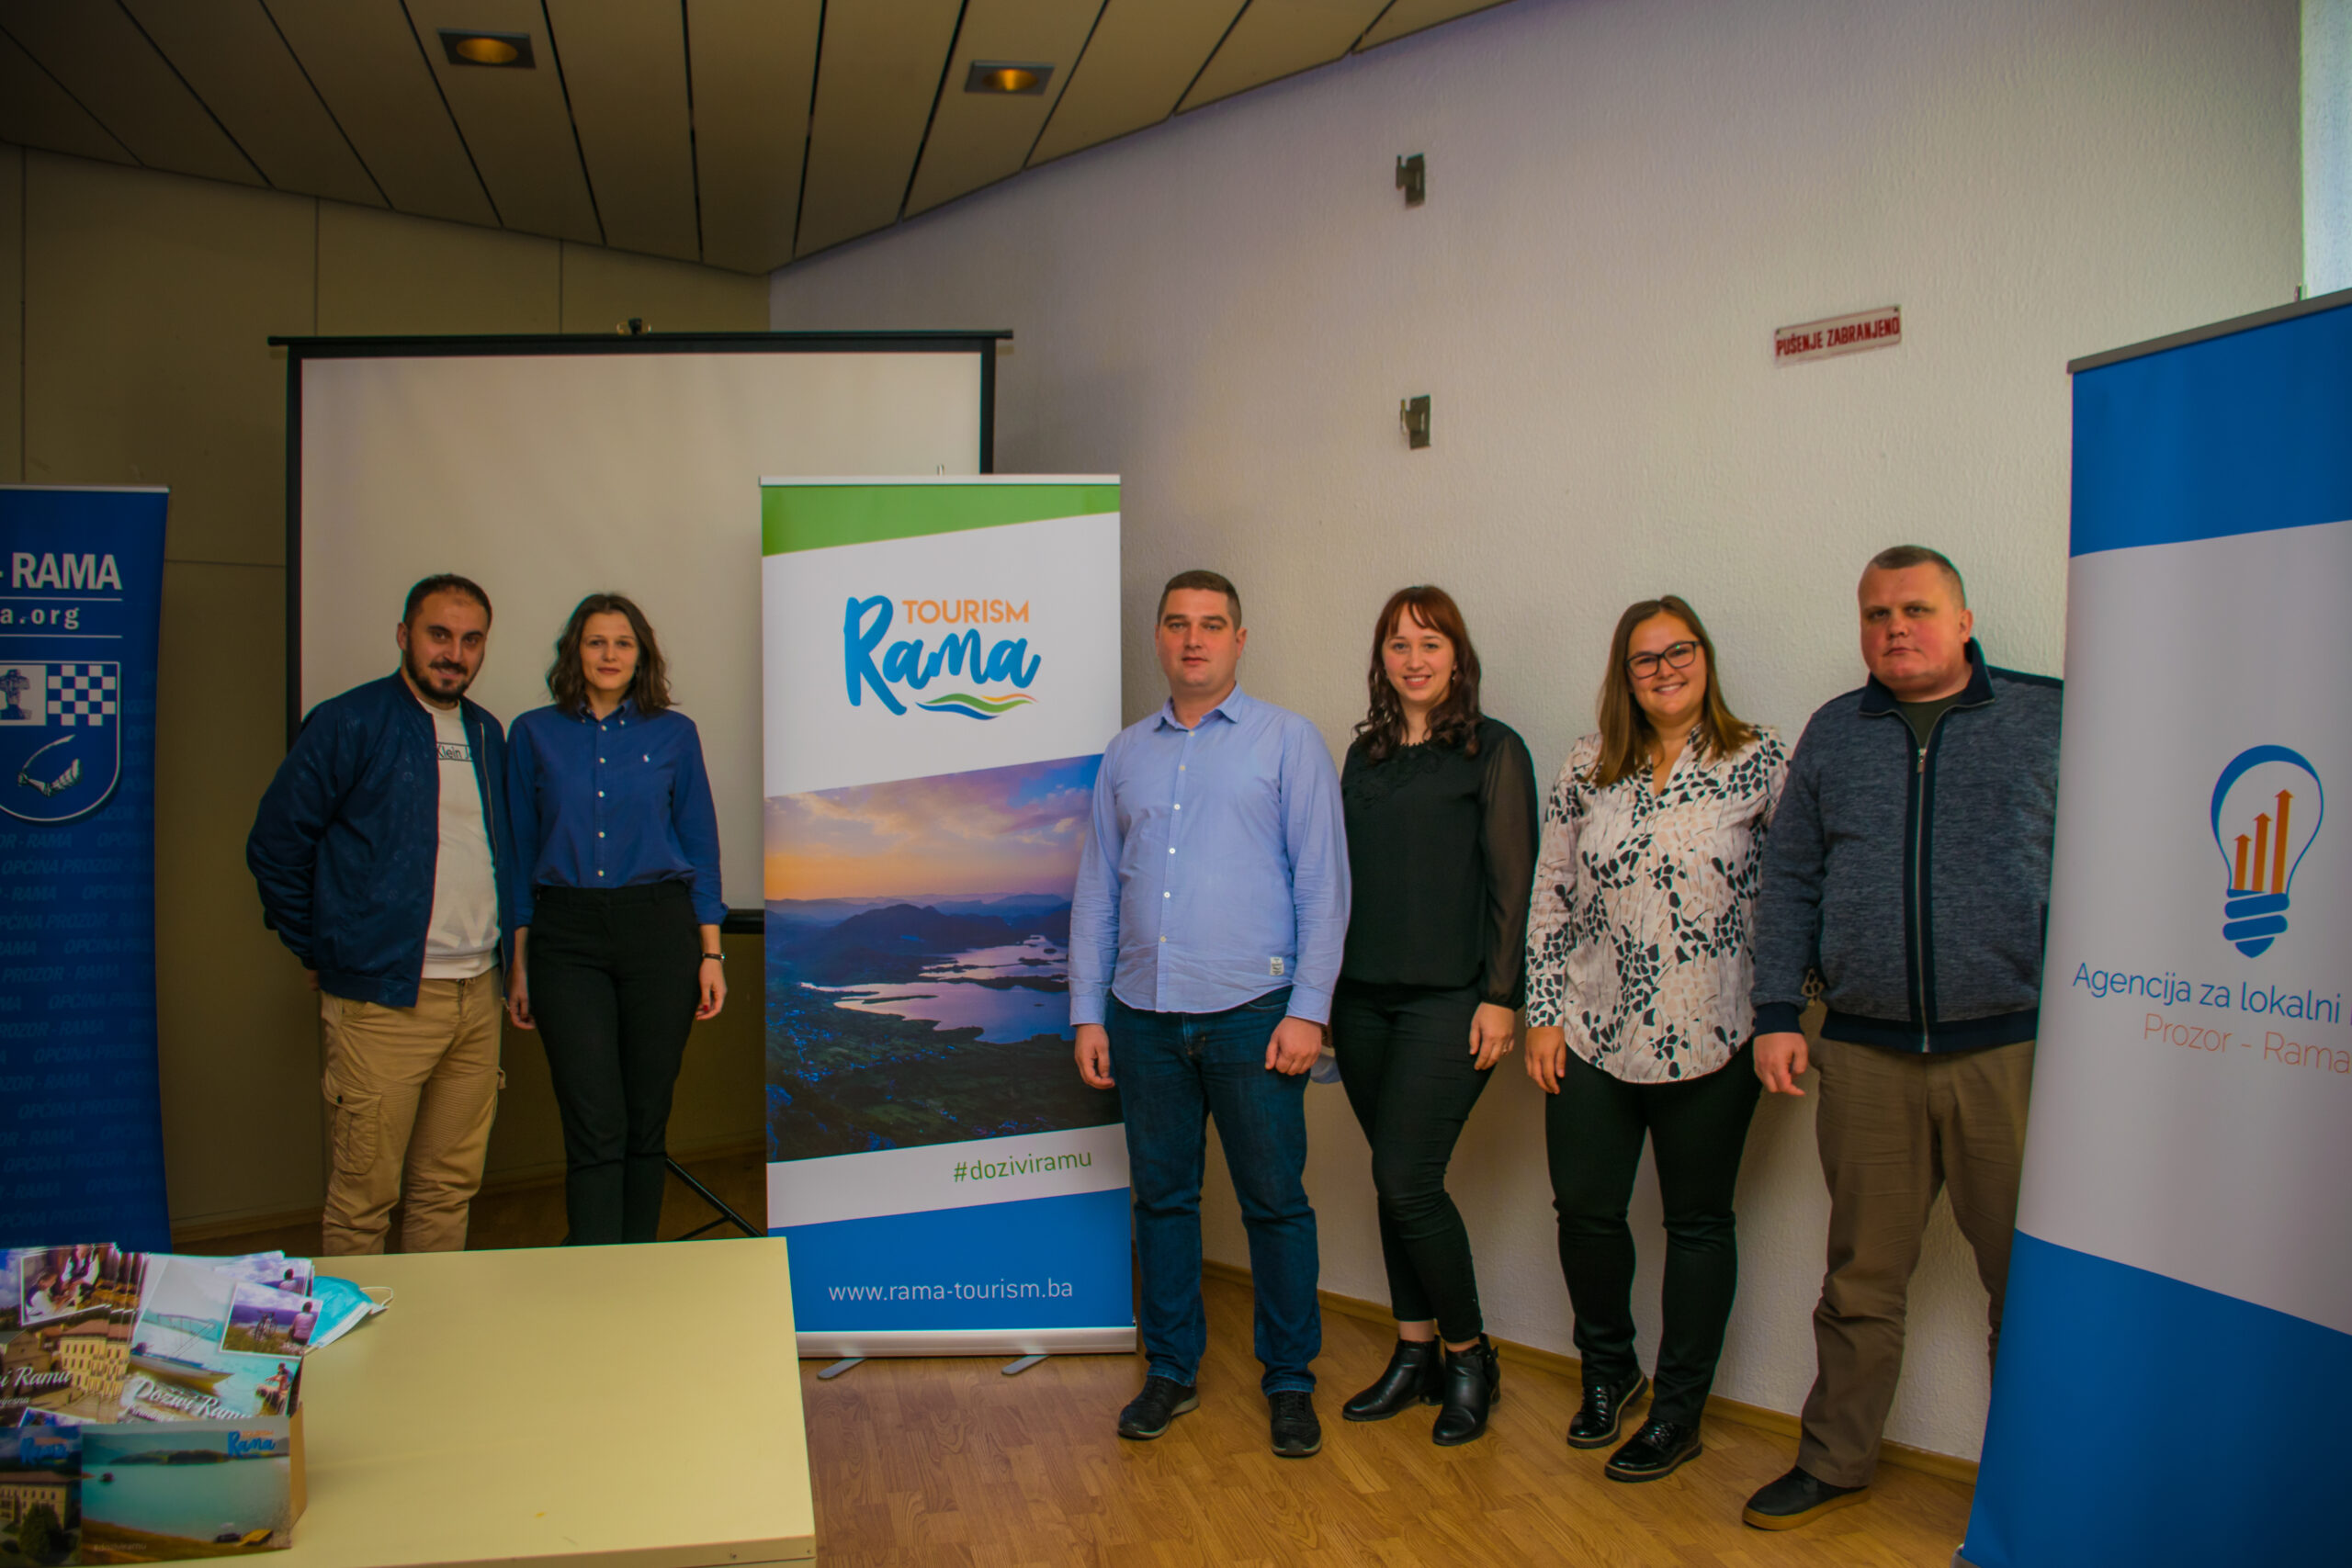 Meet “Local development Agency Prozor-Rama” one of the partners from BiH